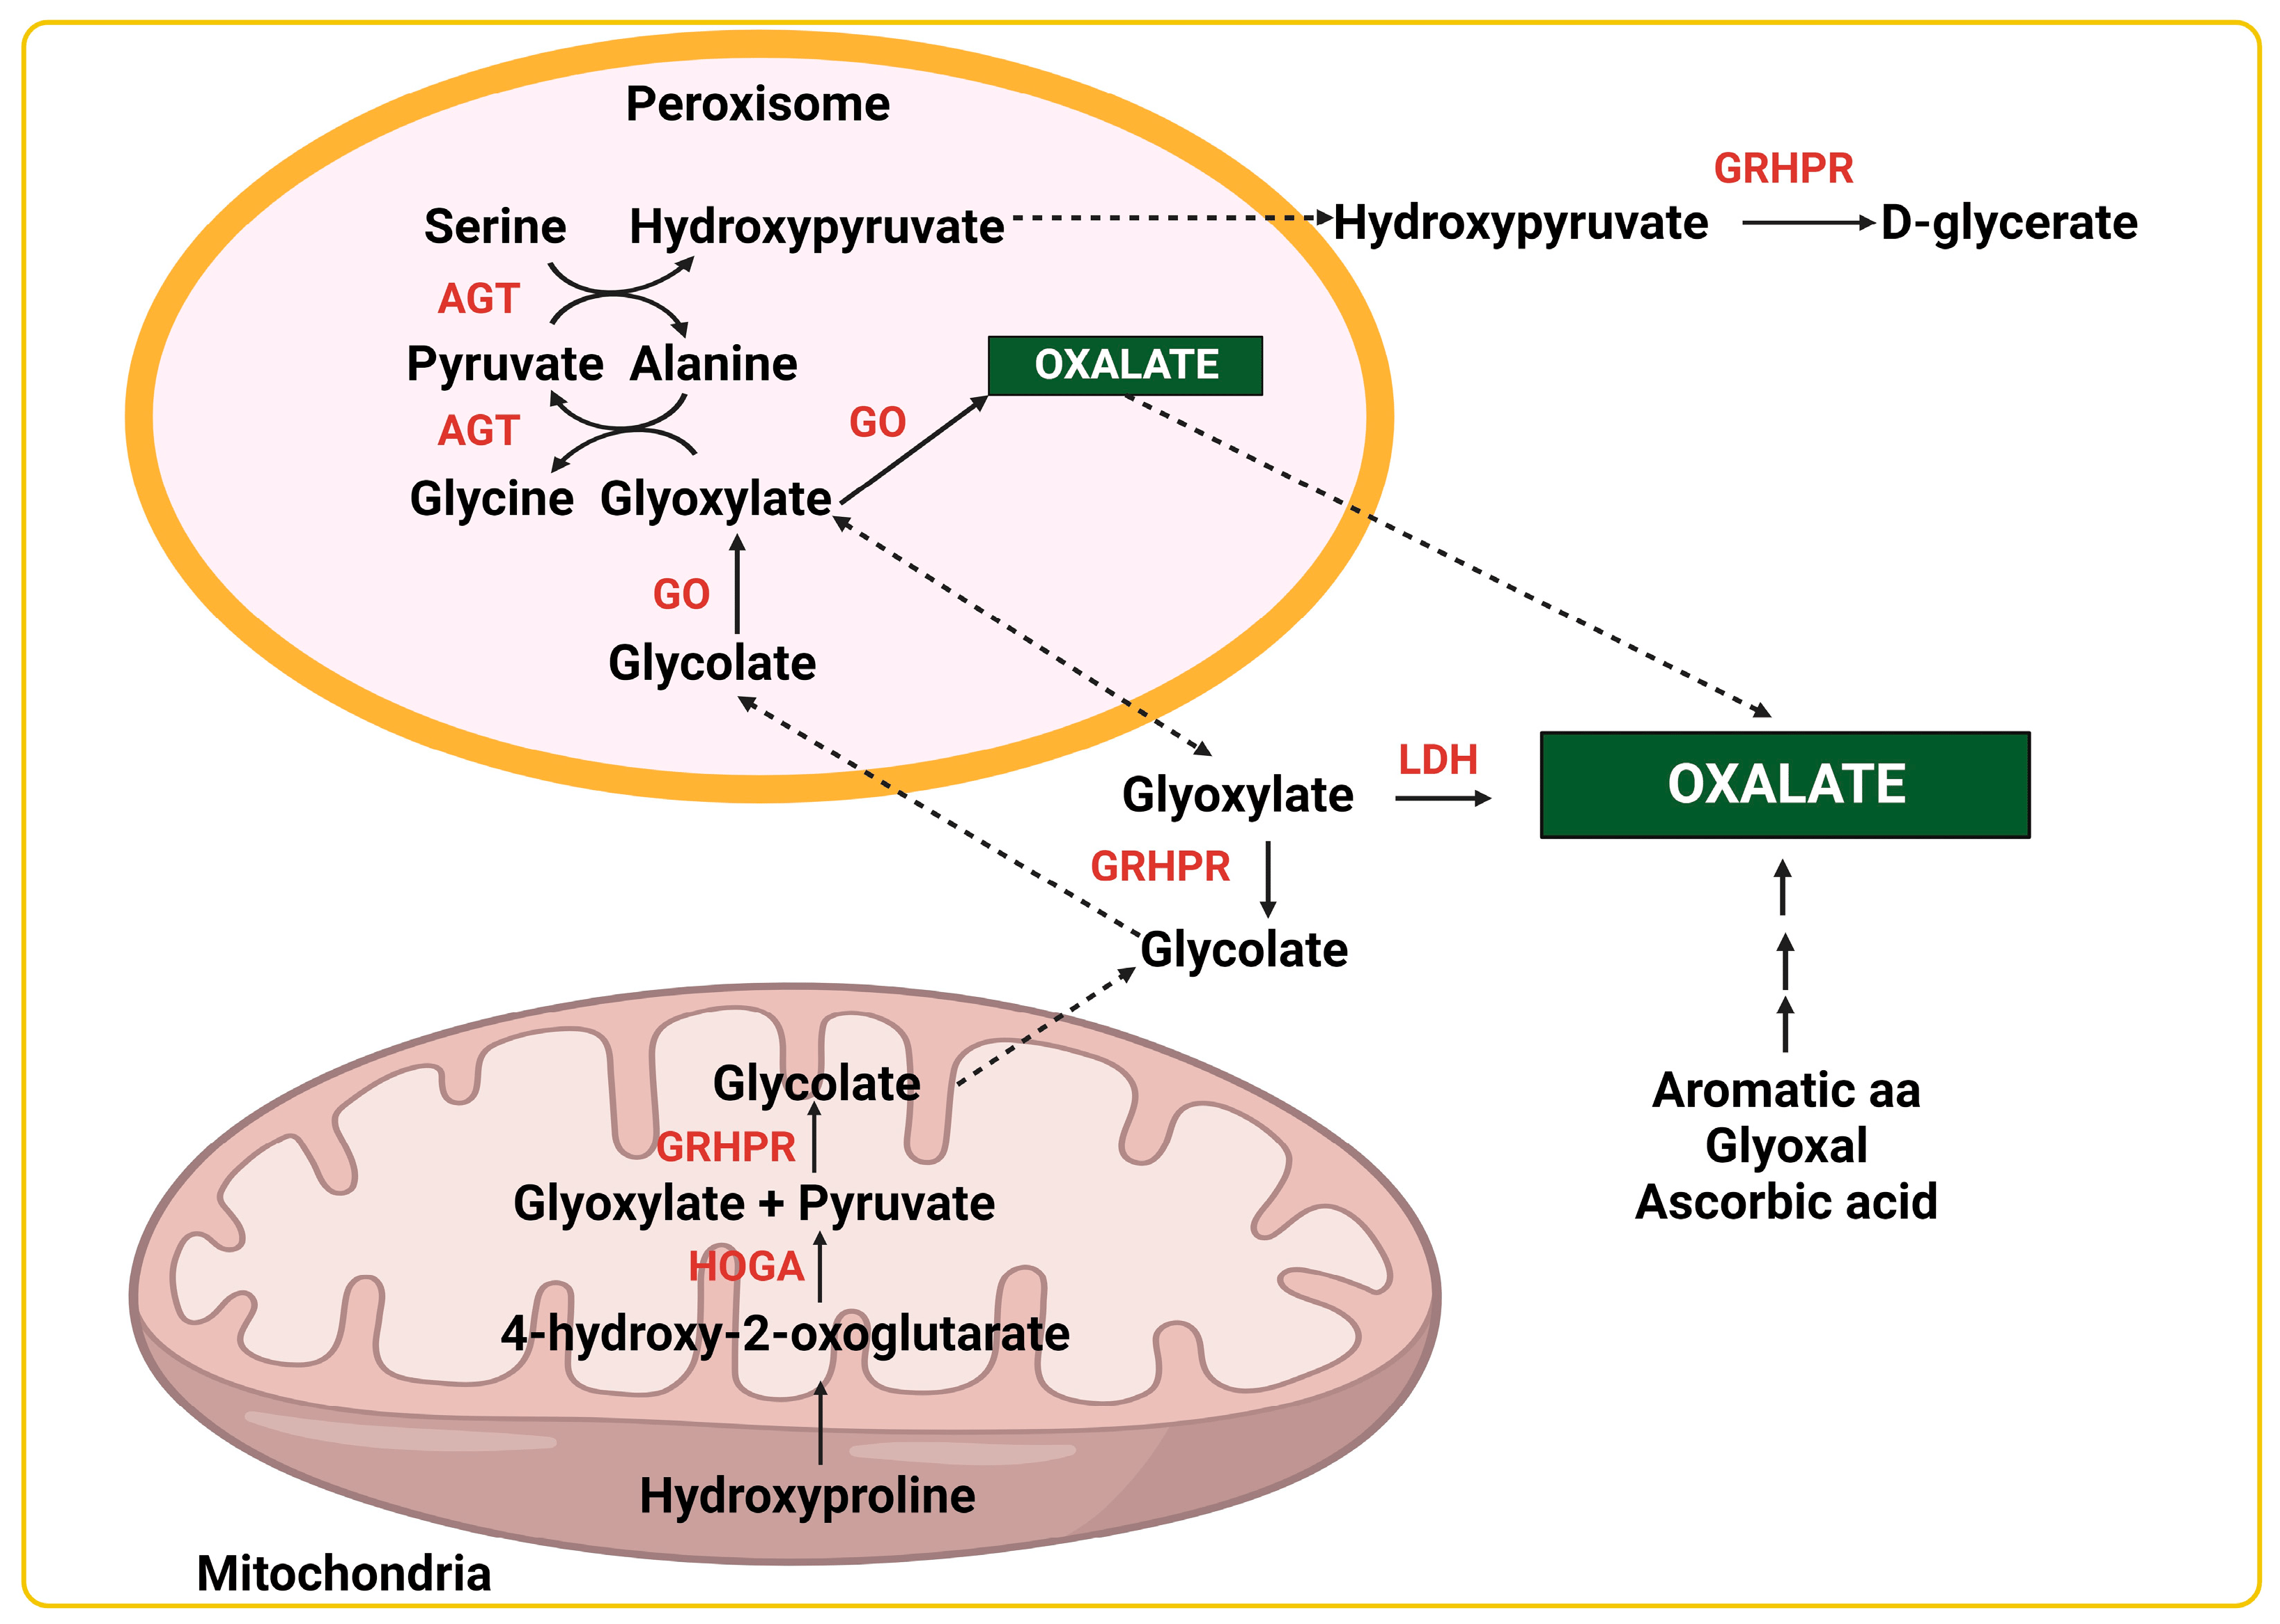 Pathways of endogenous oxalate production